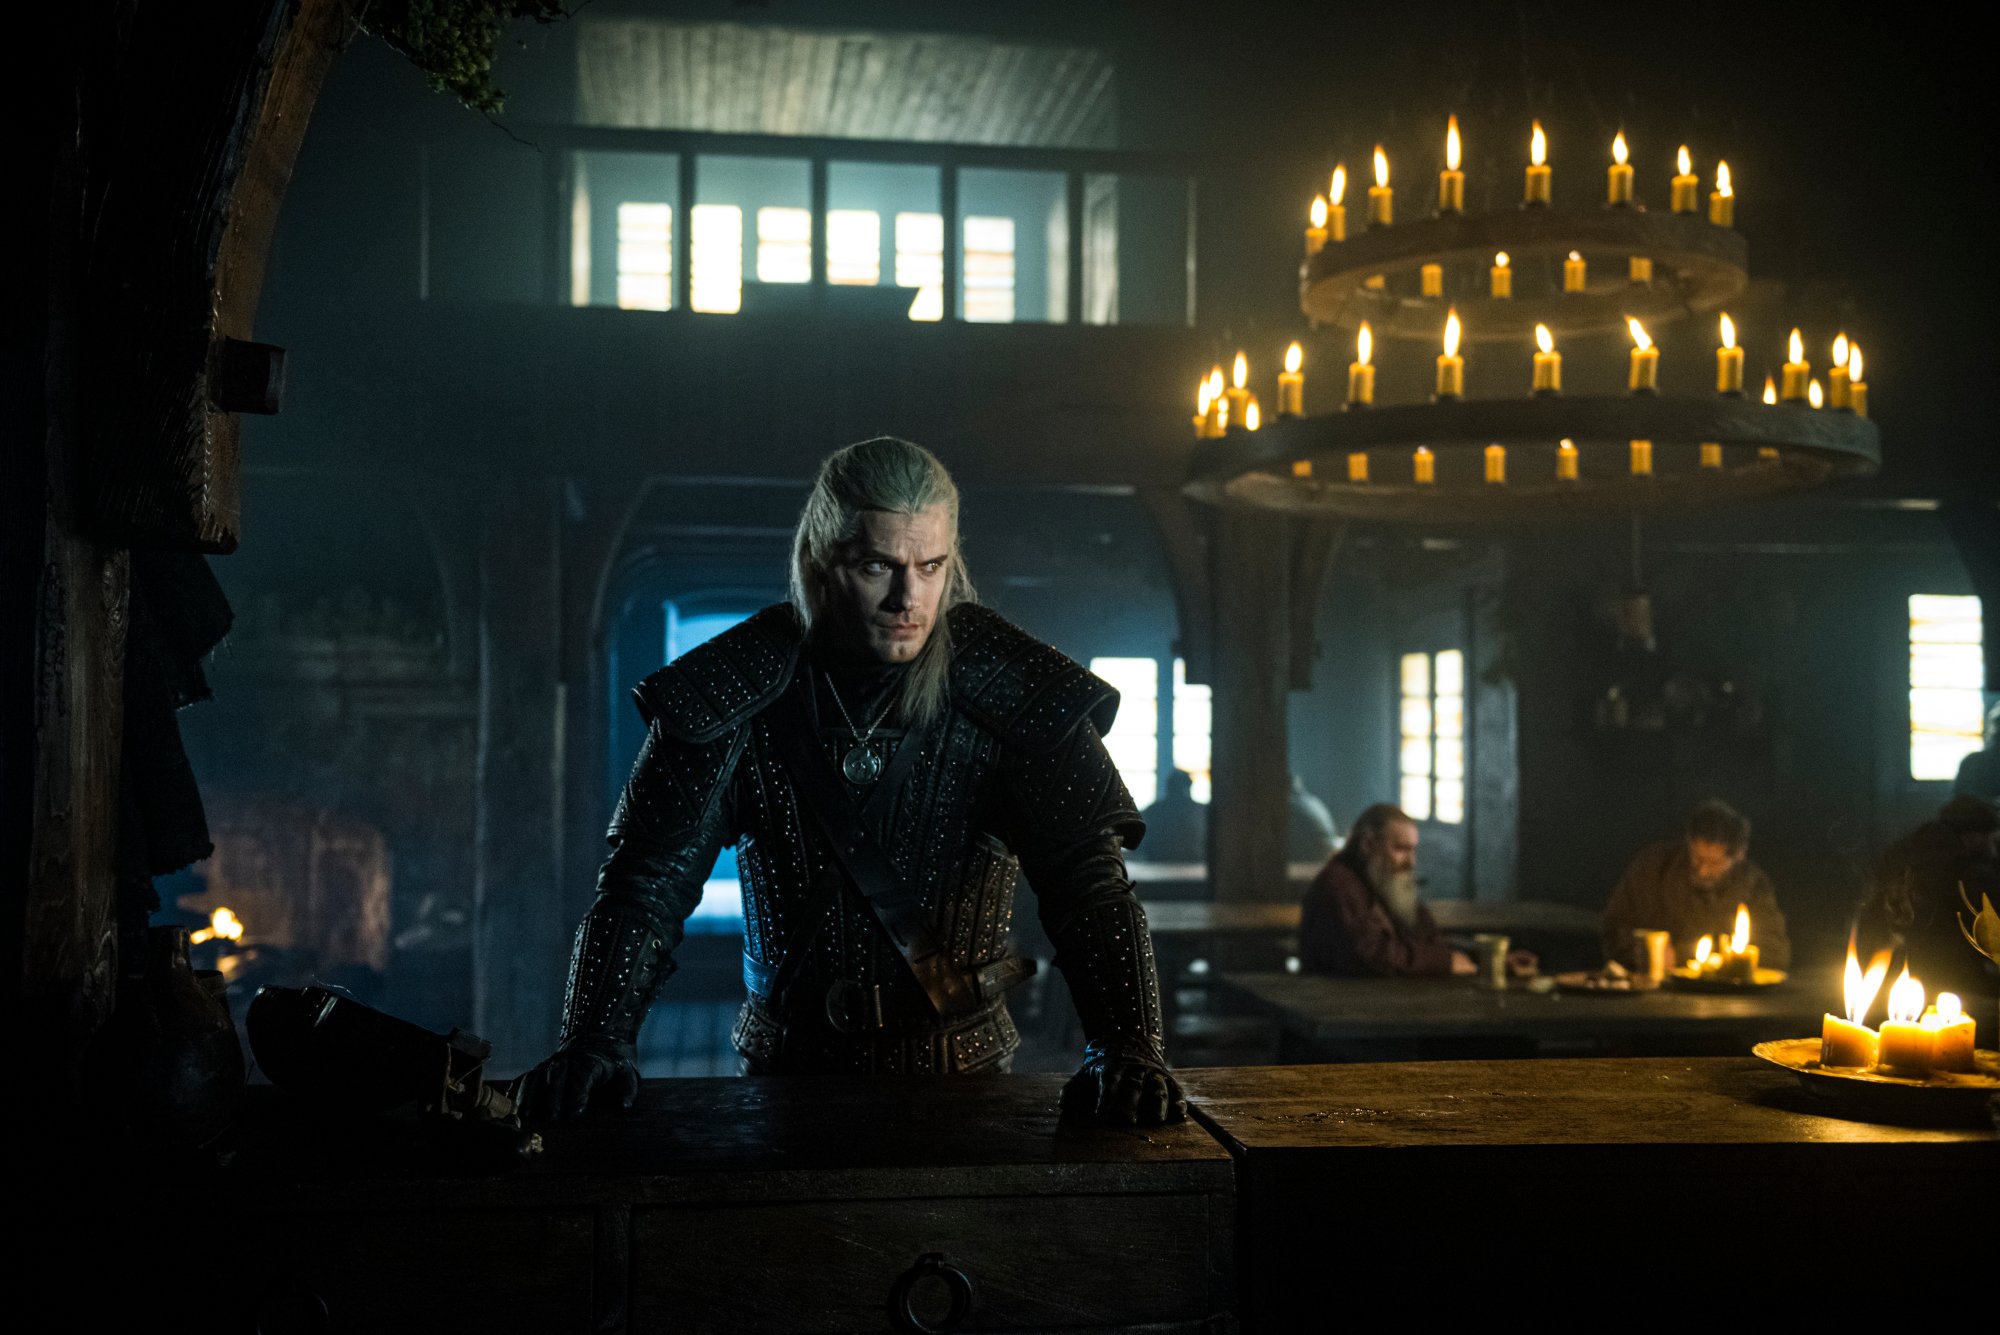 The Witcher star Henry Cavill as Geralt of Rivia. He stands wearing black leather and leaning on a table. Behind him are men eating and a chandelier. This takes place after his bathtub scene in season 1.